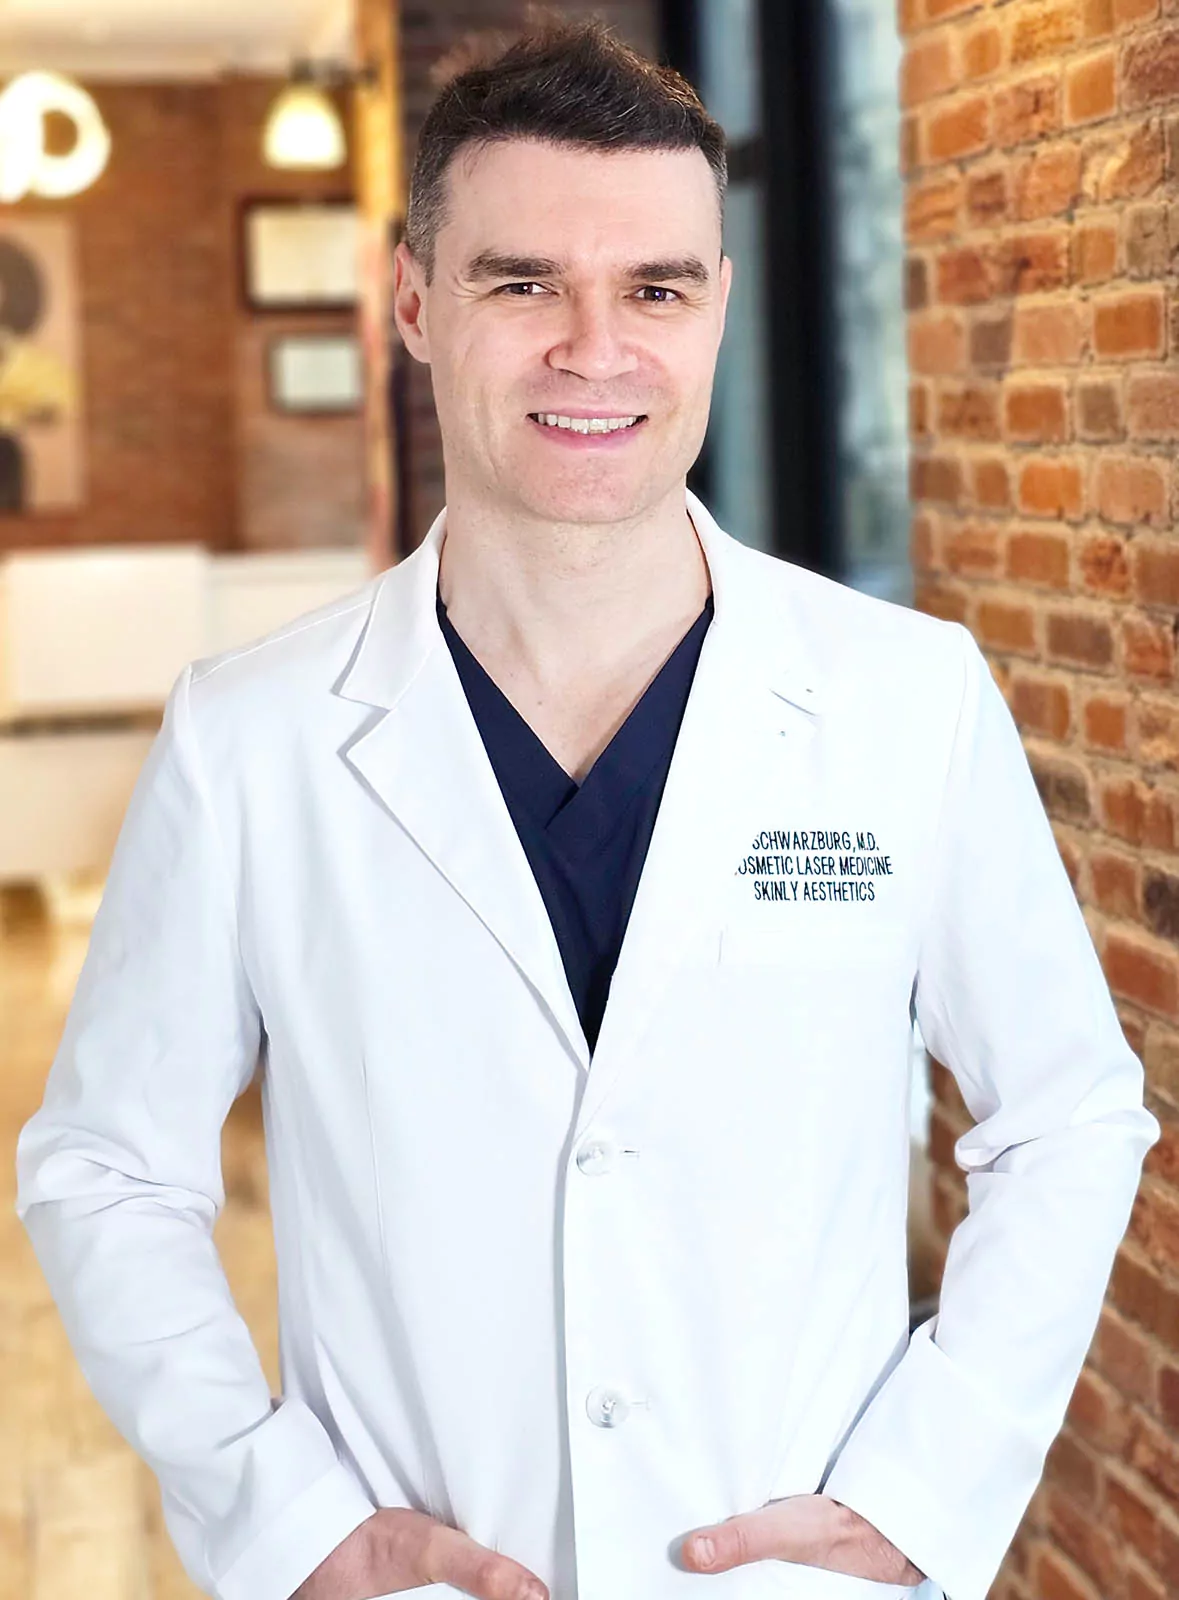 Dr. Schwarzburg is top rated cosmetic dermatologist in New York